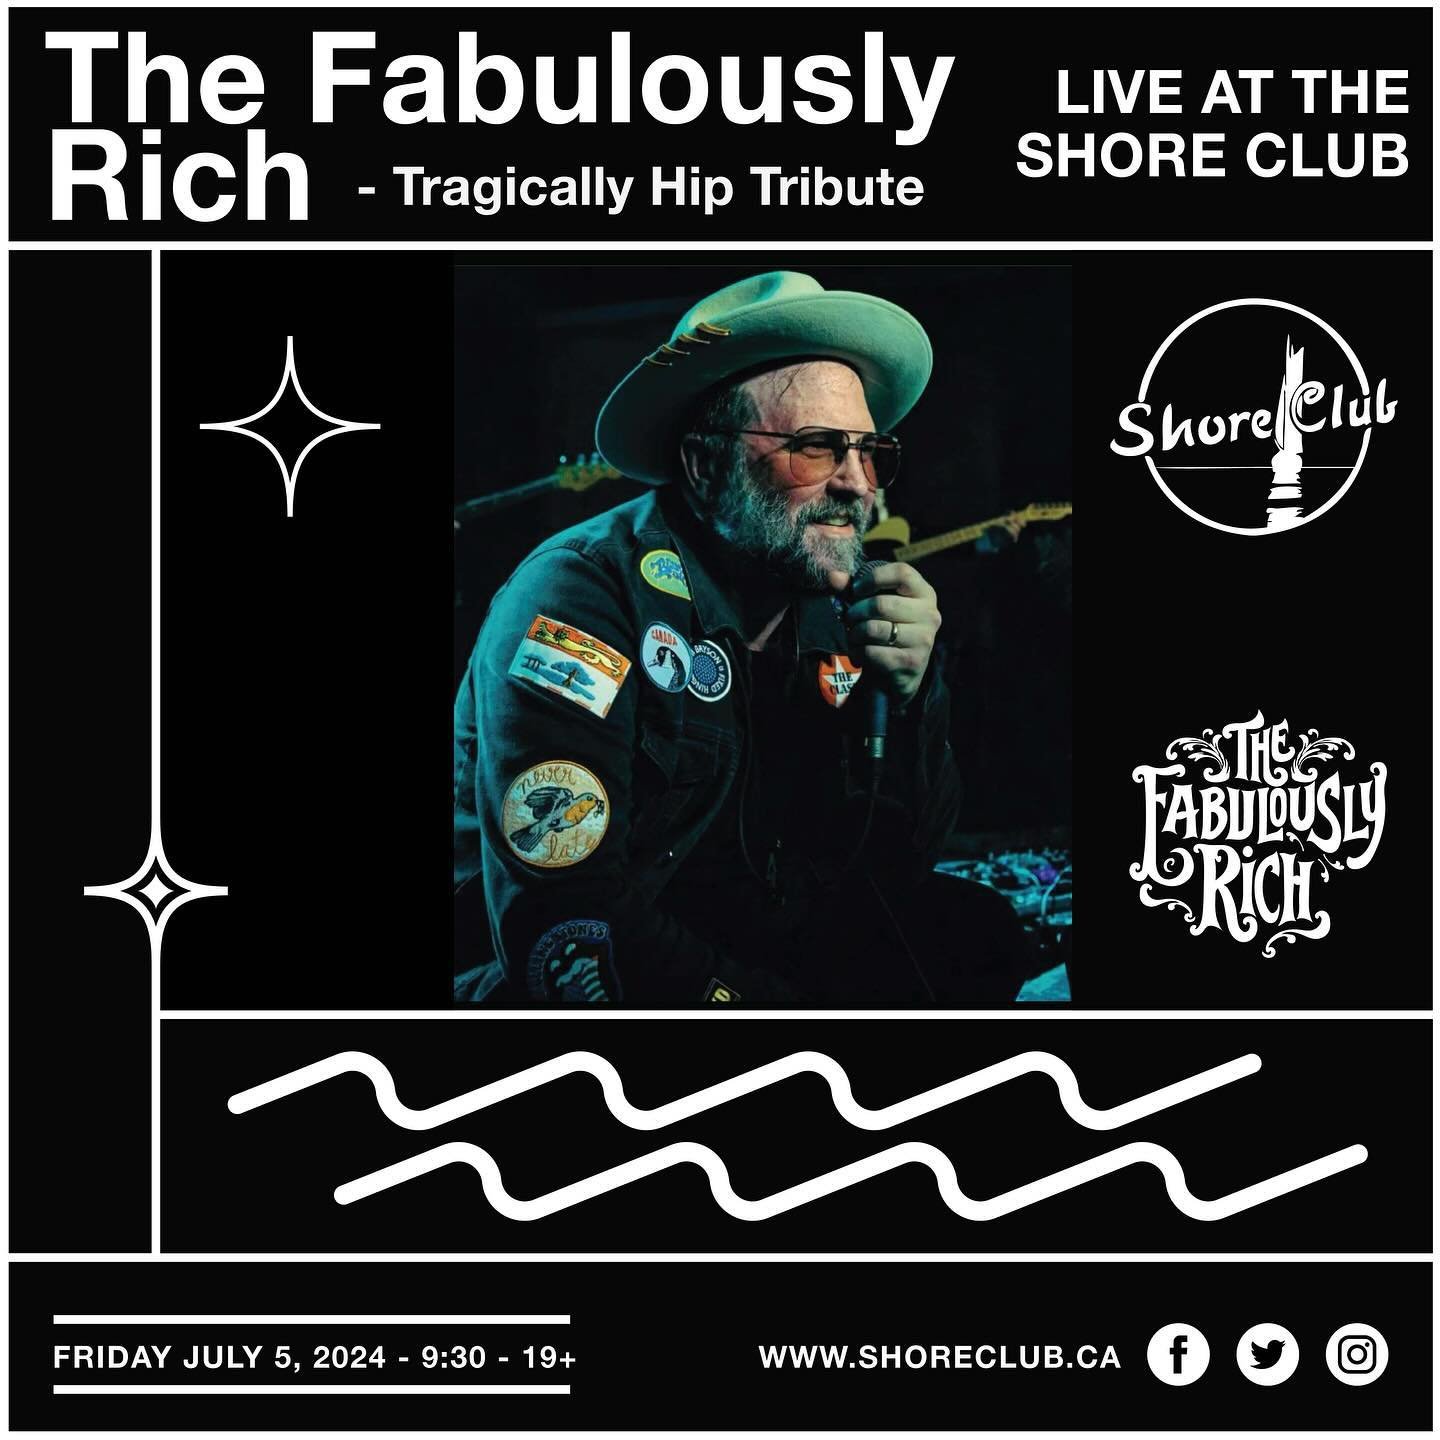 No dress rehearsal this is the real deal. The Fabulously Rich are back after a sold out show last year they are armed with will and determination to make this the best show yet! 
.
Show Friday July 5, 9:30, 19+
Tickets on sale tomorrow April 30 at 10